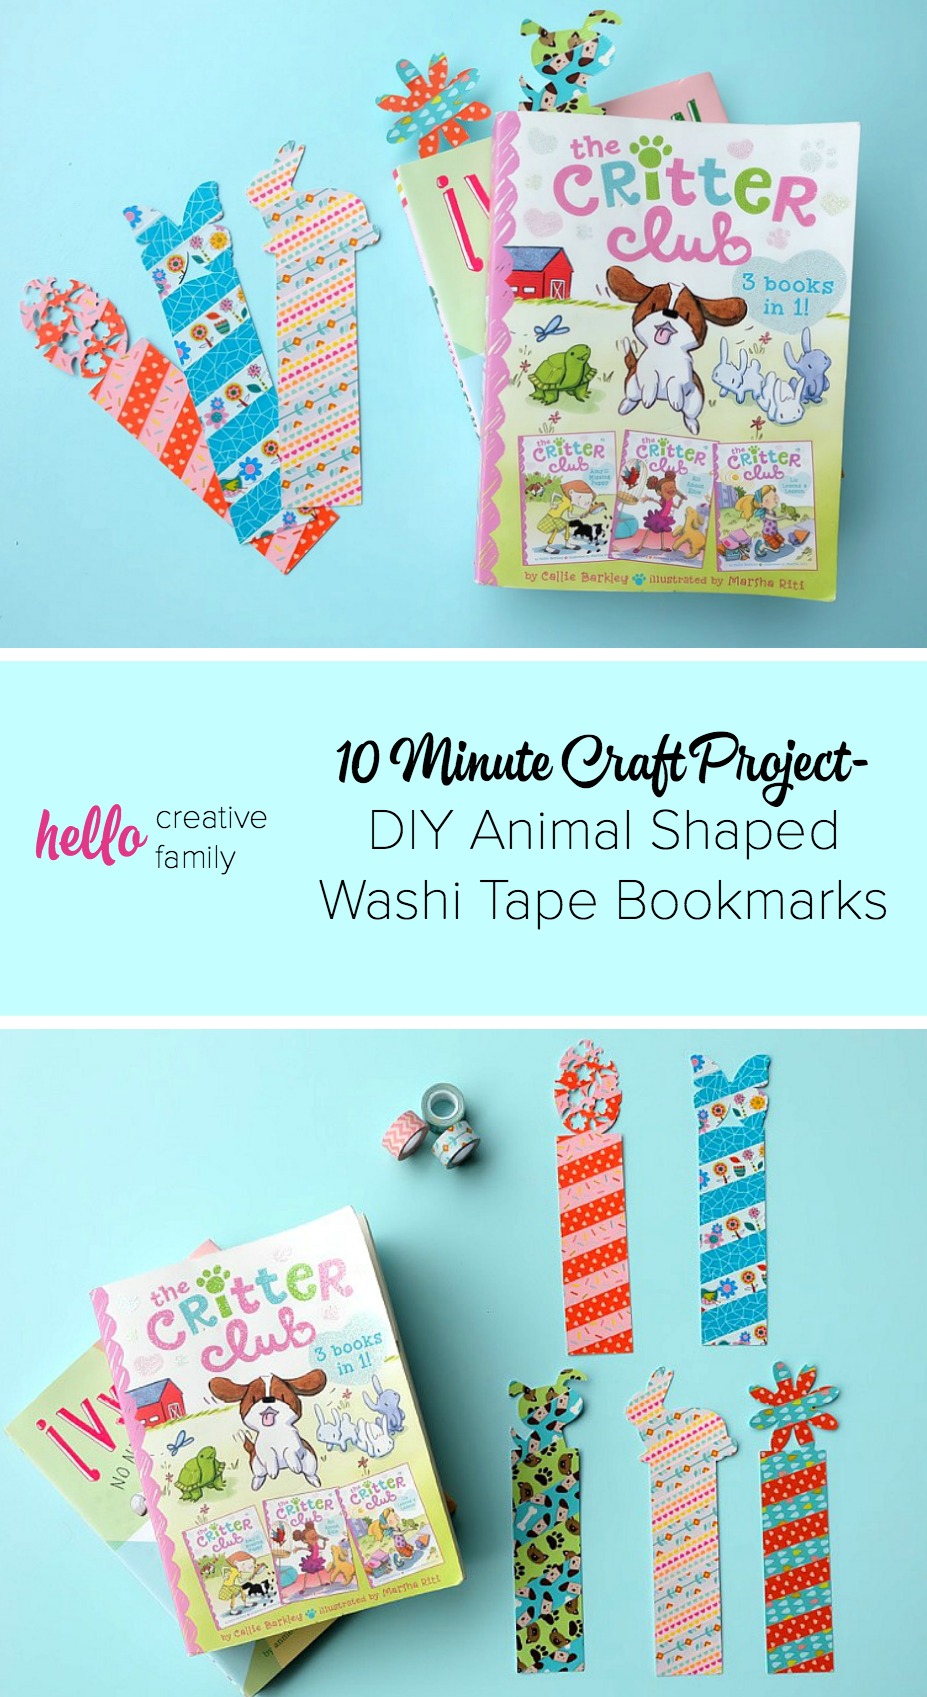 These DIY Animal Shaped Washi Tape Bookmarks made on the Cricut Explore are easy to make and they are a 10 minute craft project! They are so cute and would make great handmade gifts or non-candy Easter presents!